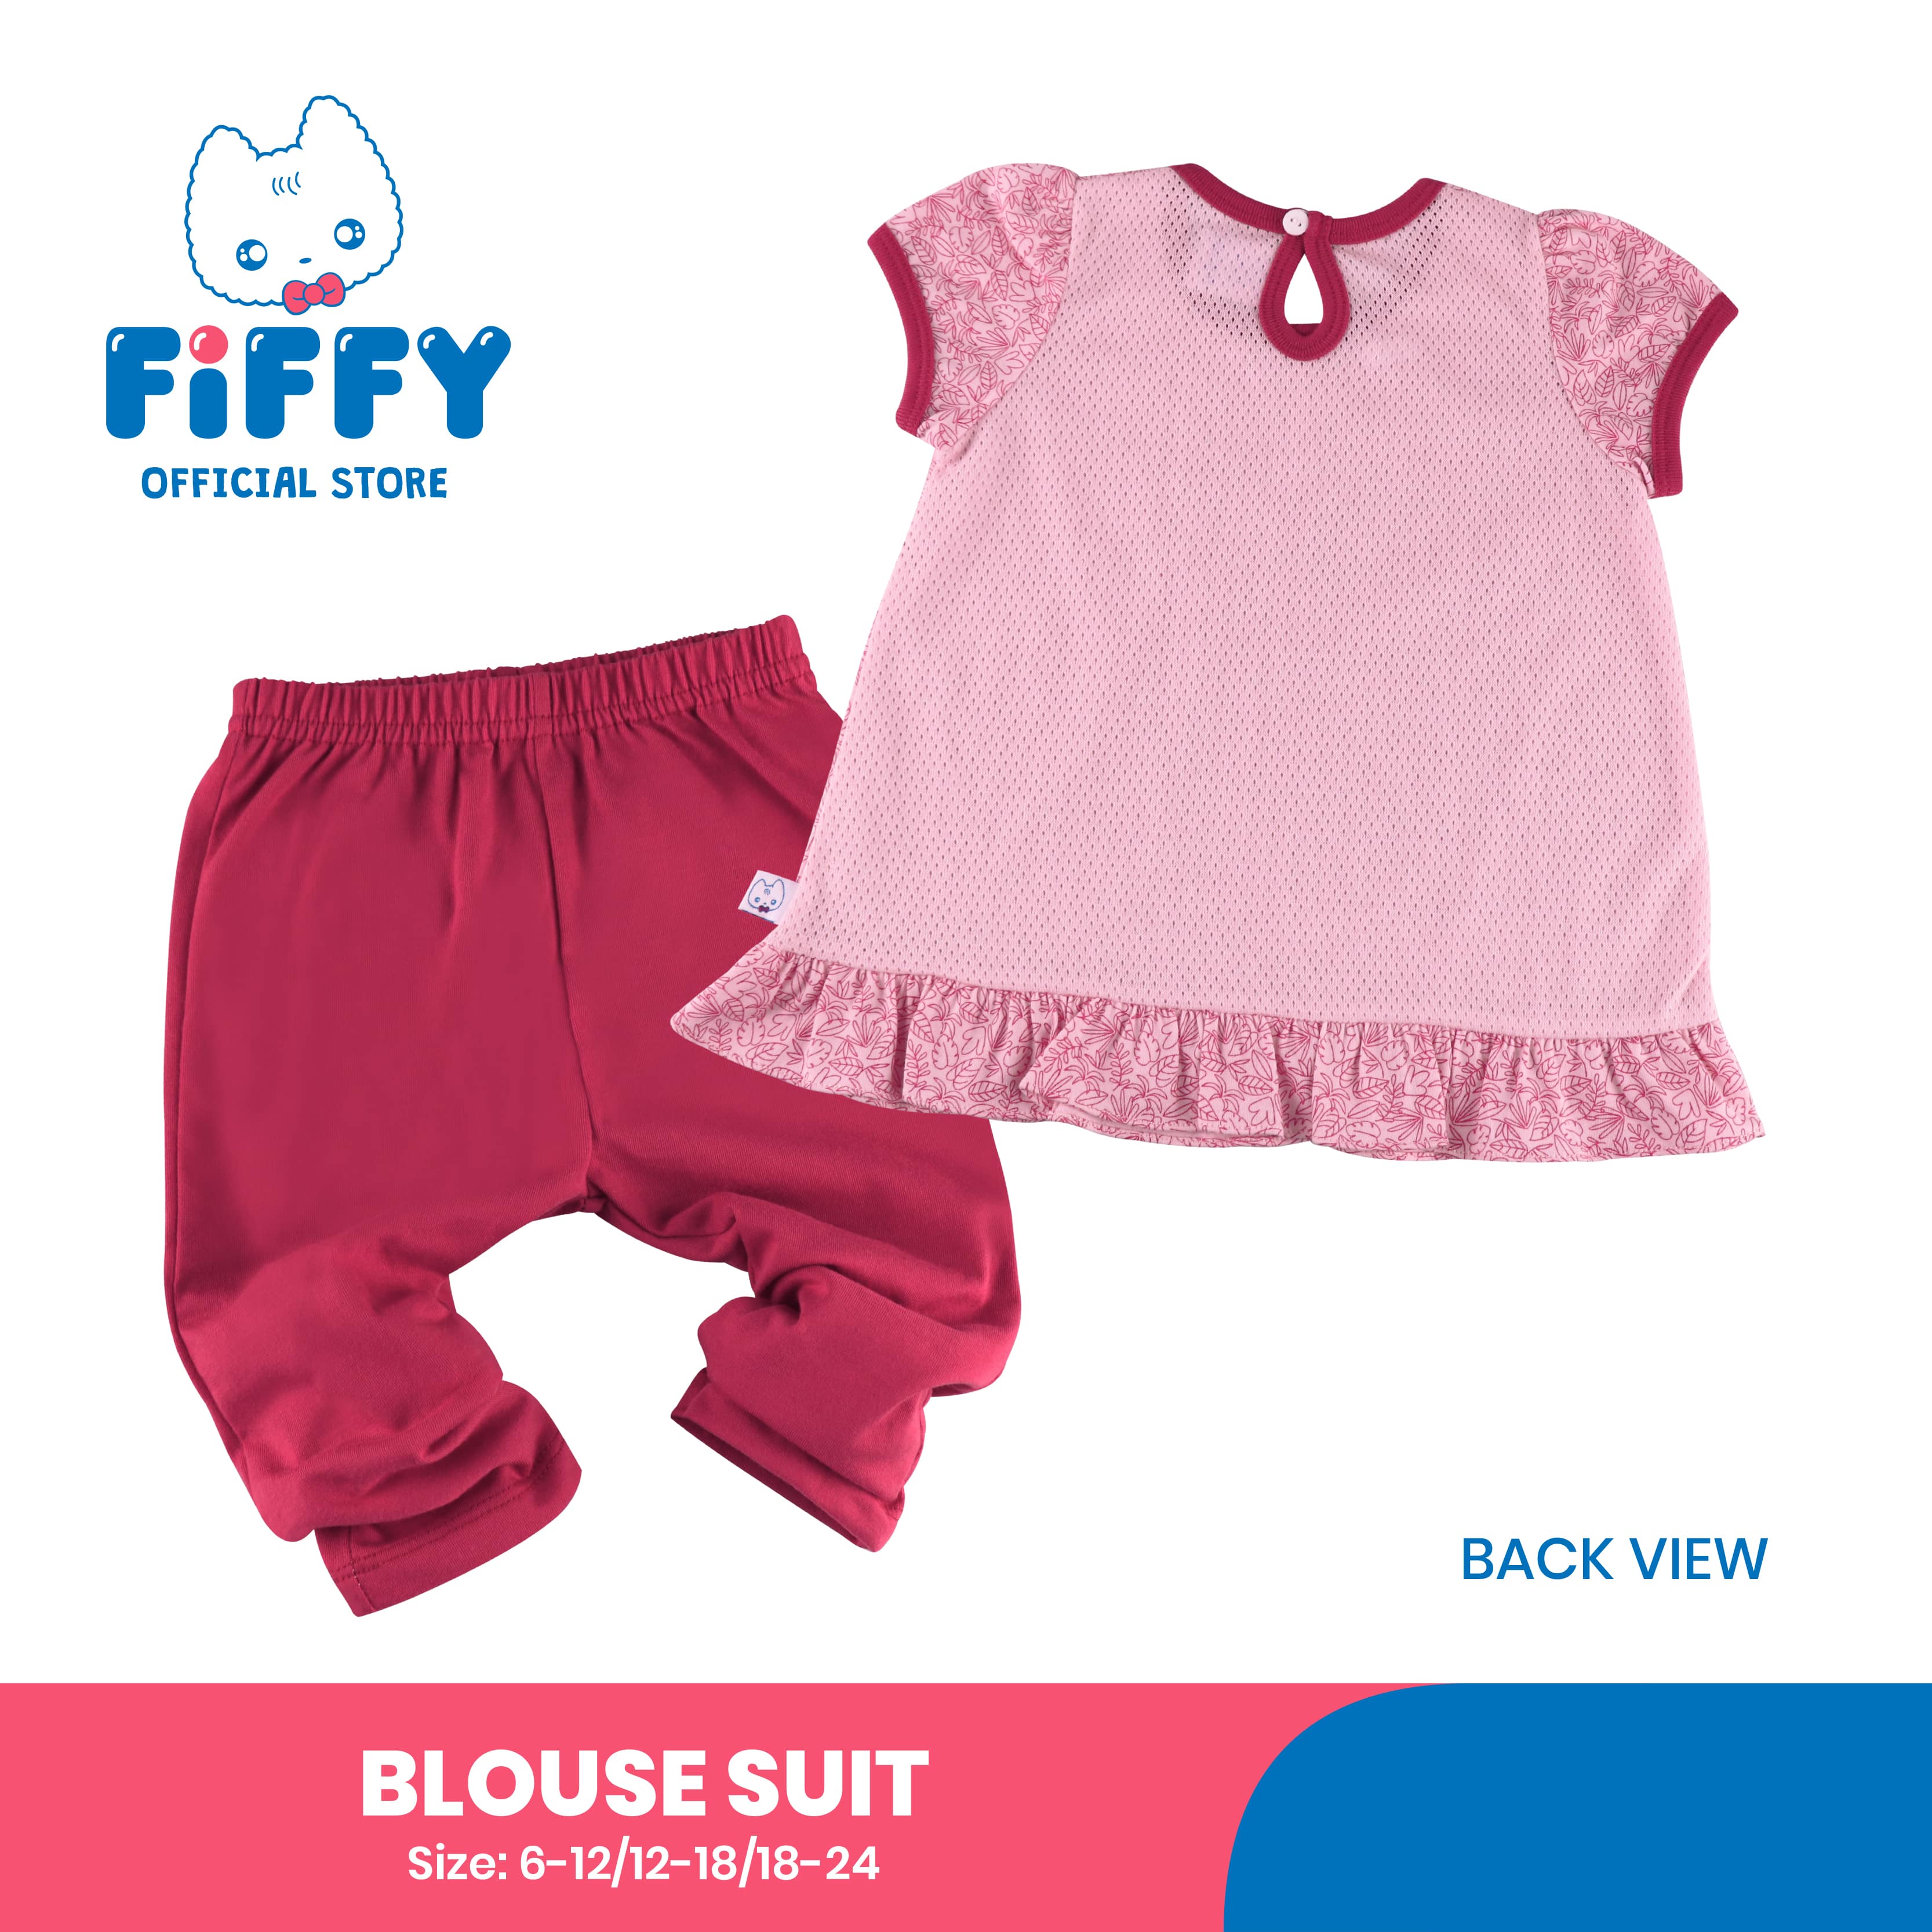 FIFFY PINKY LIFE BLOUSE SUIT